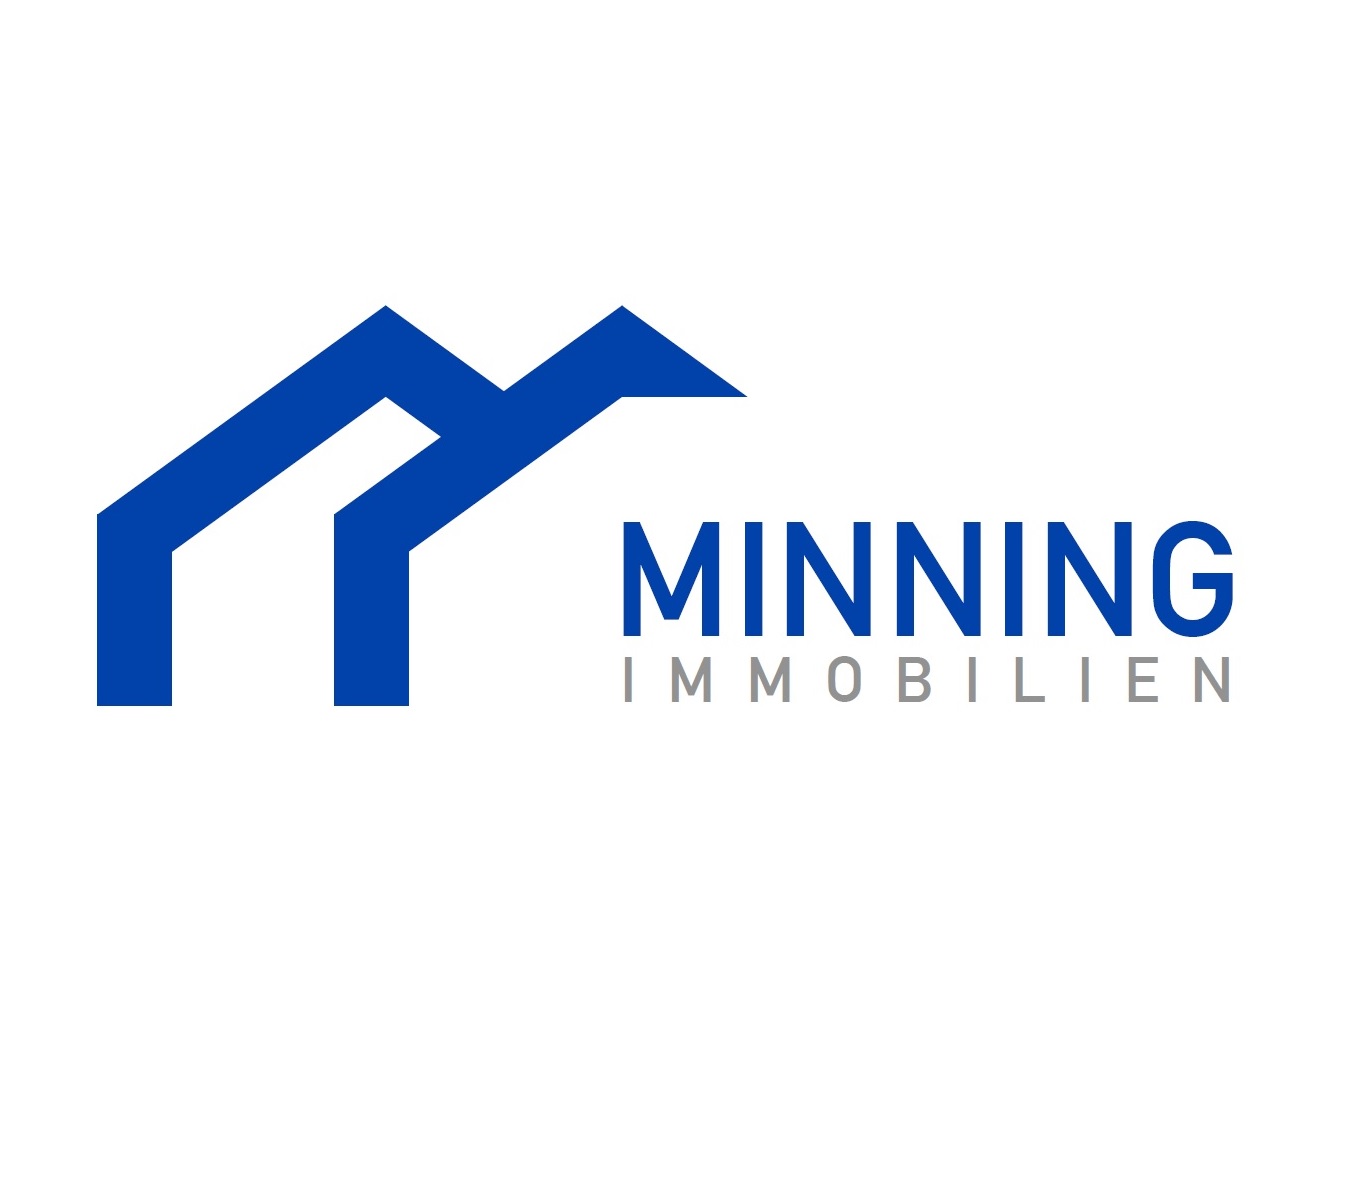 Bild 3 Minning Immobilien in Hannover